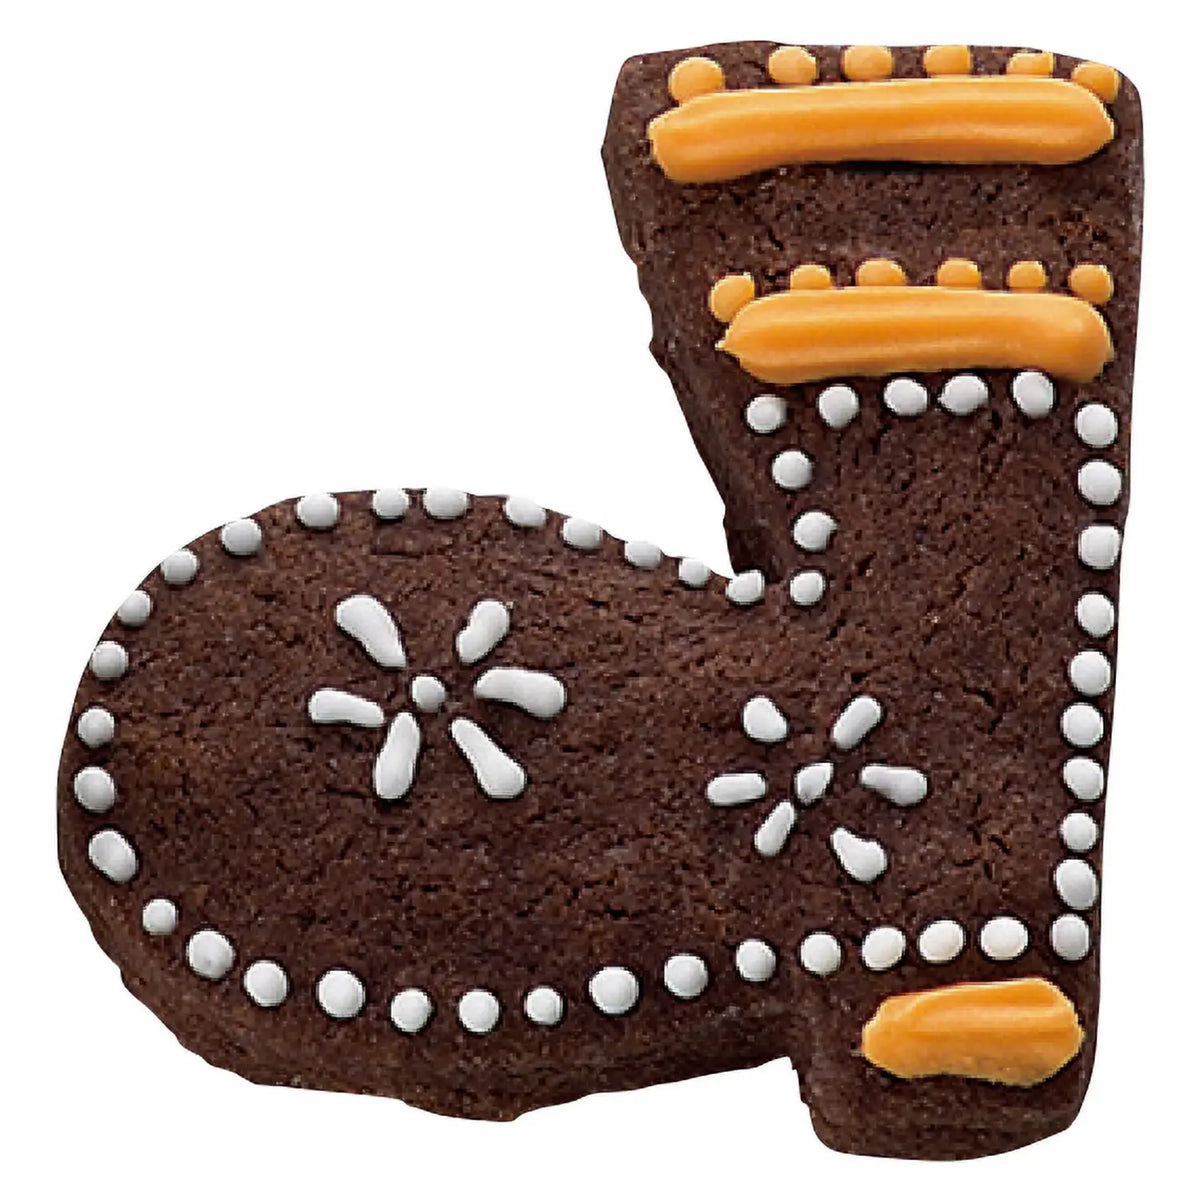 TIGERCROWN Cake Land Stainless Steel Cookie Cutter Boot